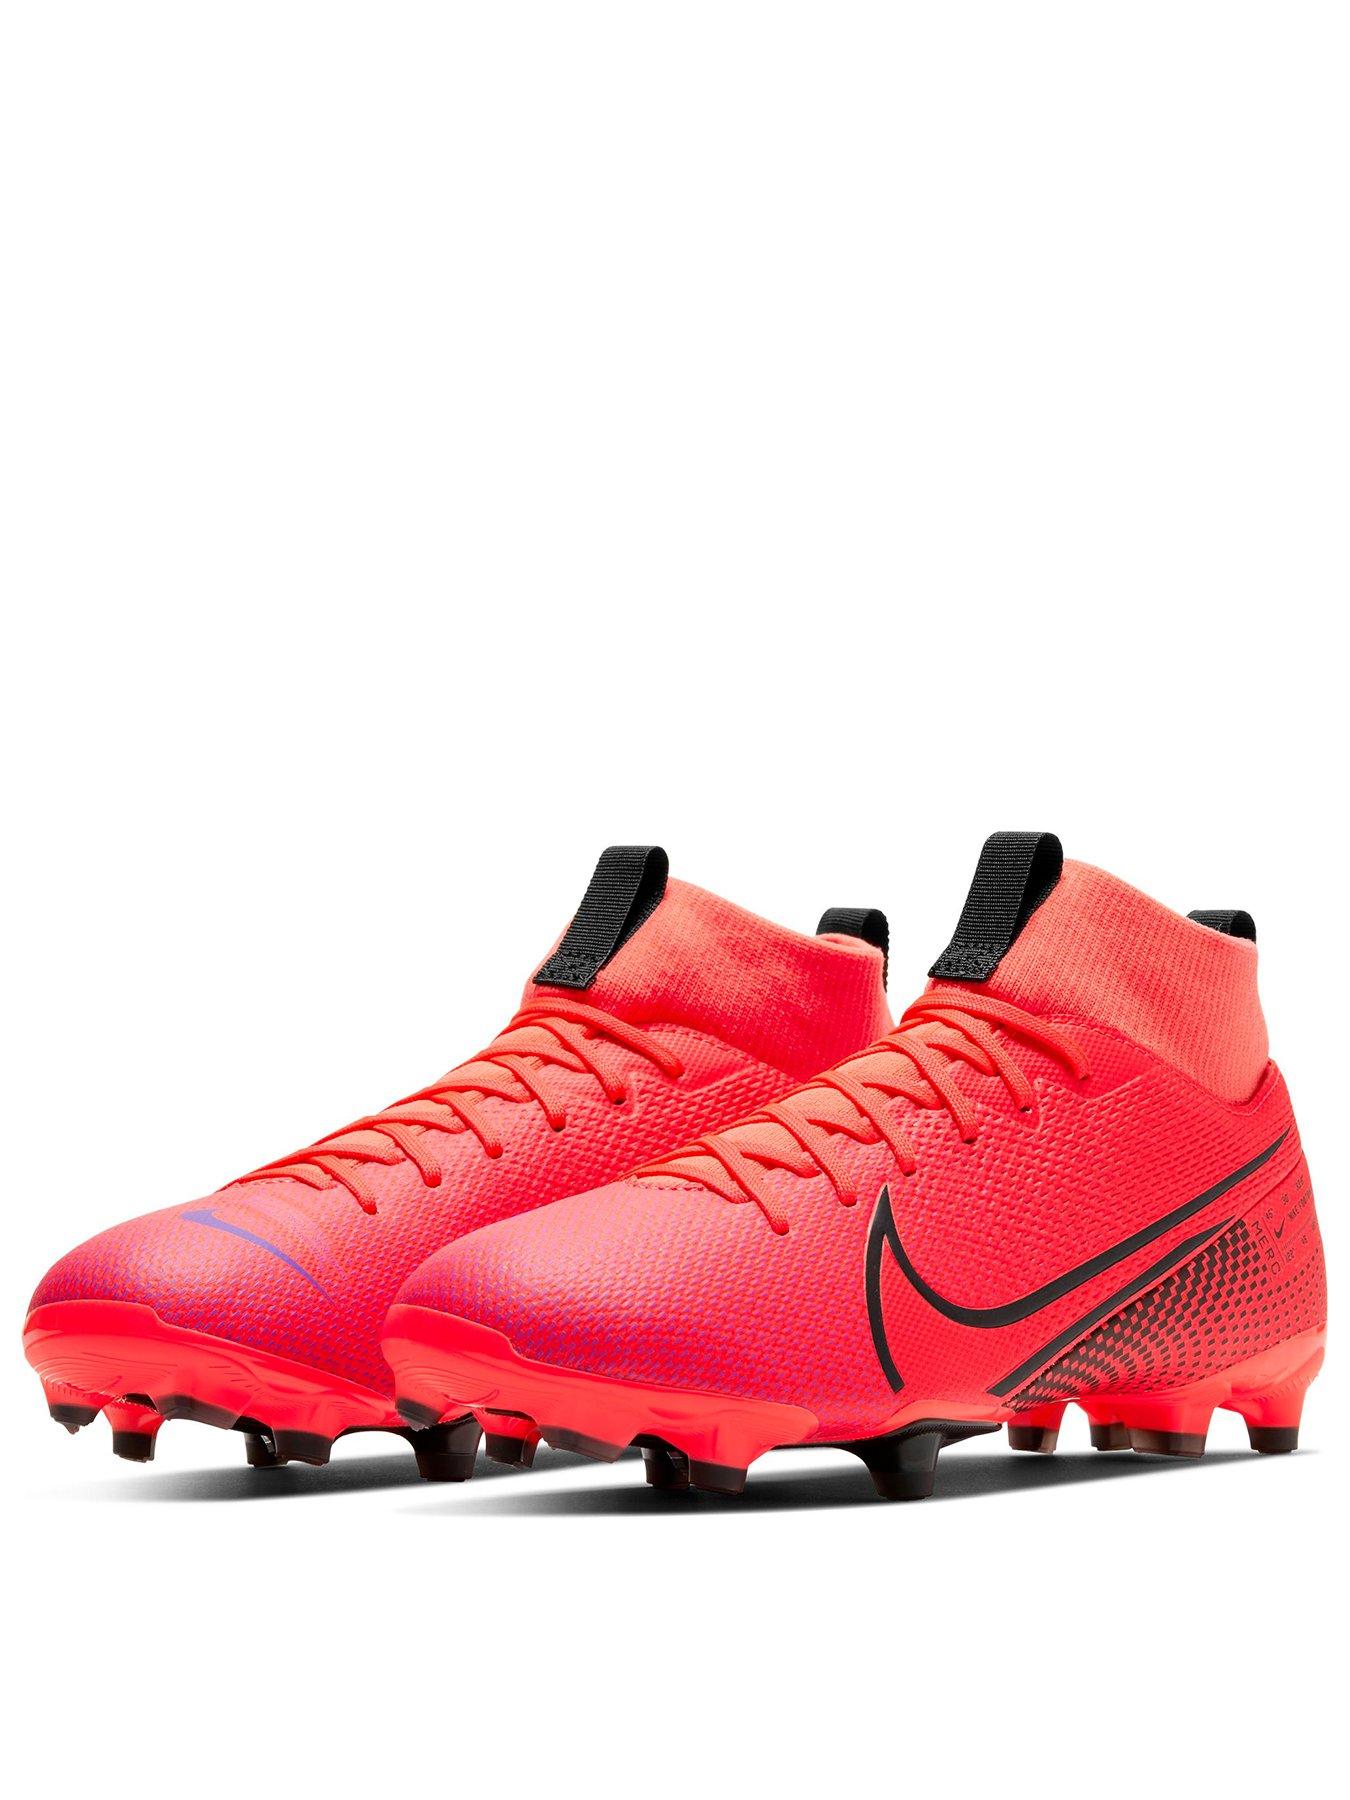 football shoes nike for kids 